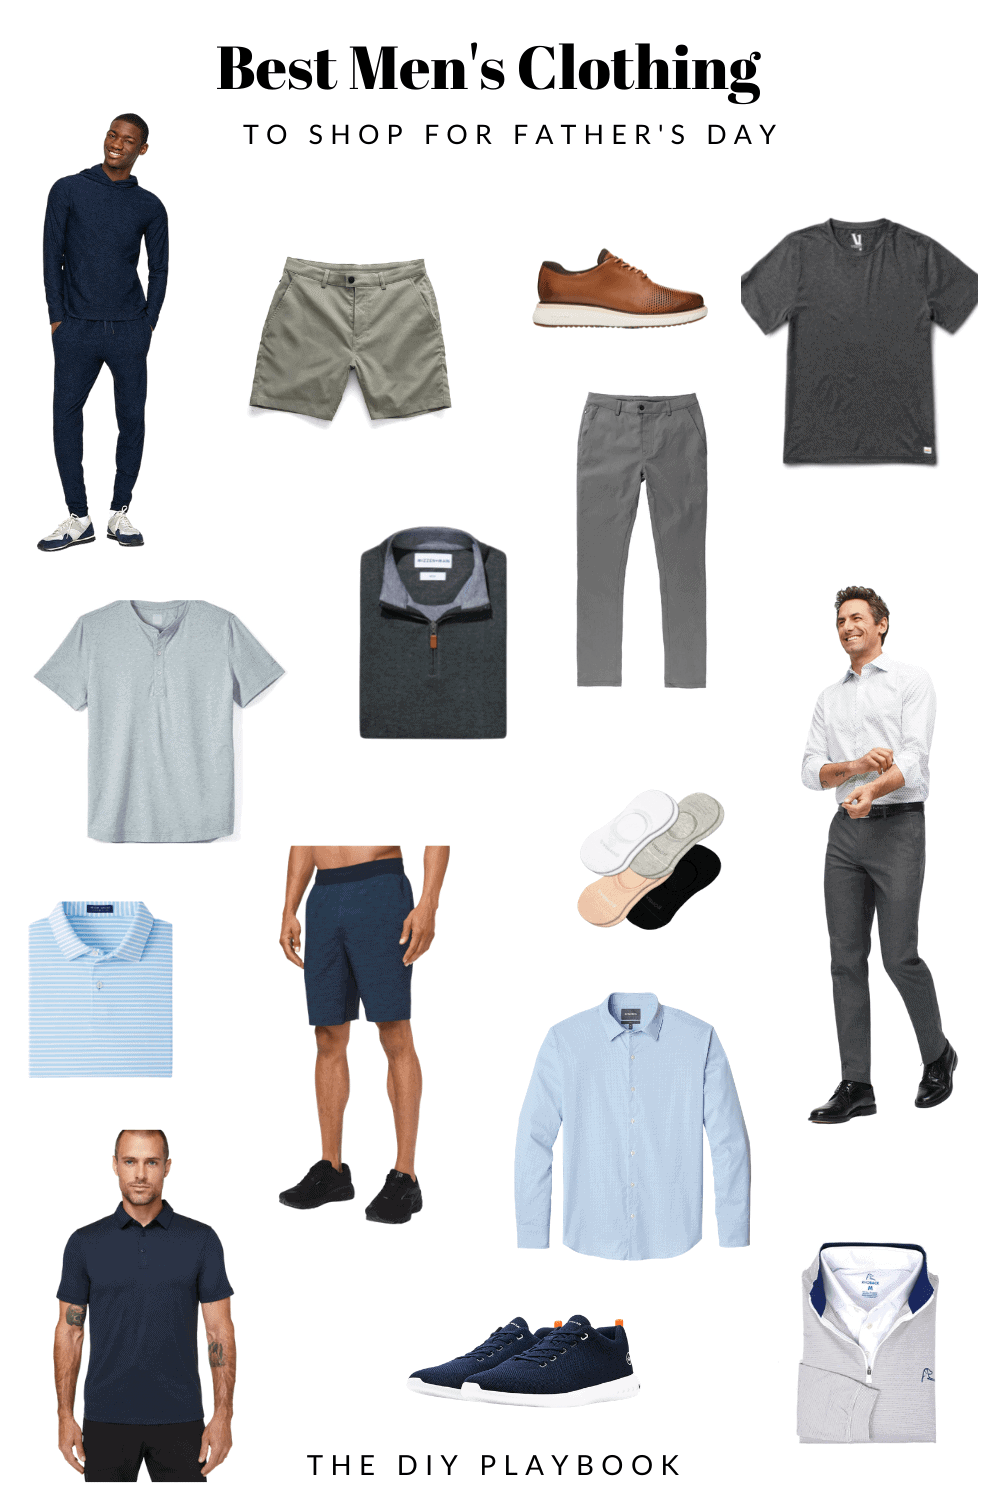 The best men's clothing brands to shop for Father's Day